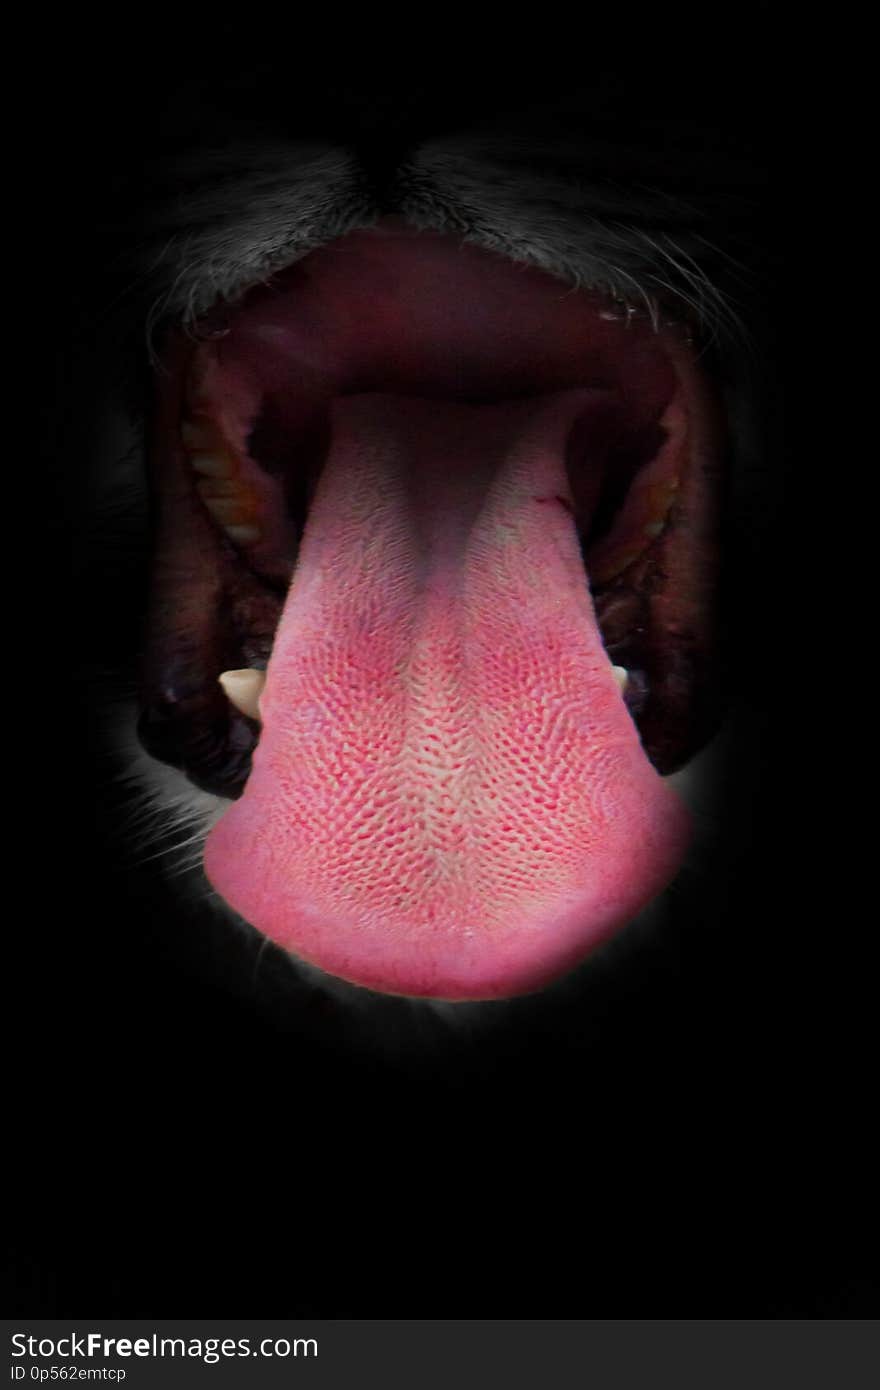 The muzzle of a lioness with an open predatory mouth black abyss of the womb and a long red tongue close-up, expresses greed and desire